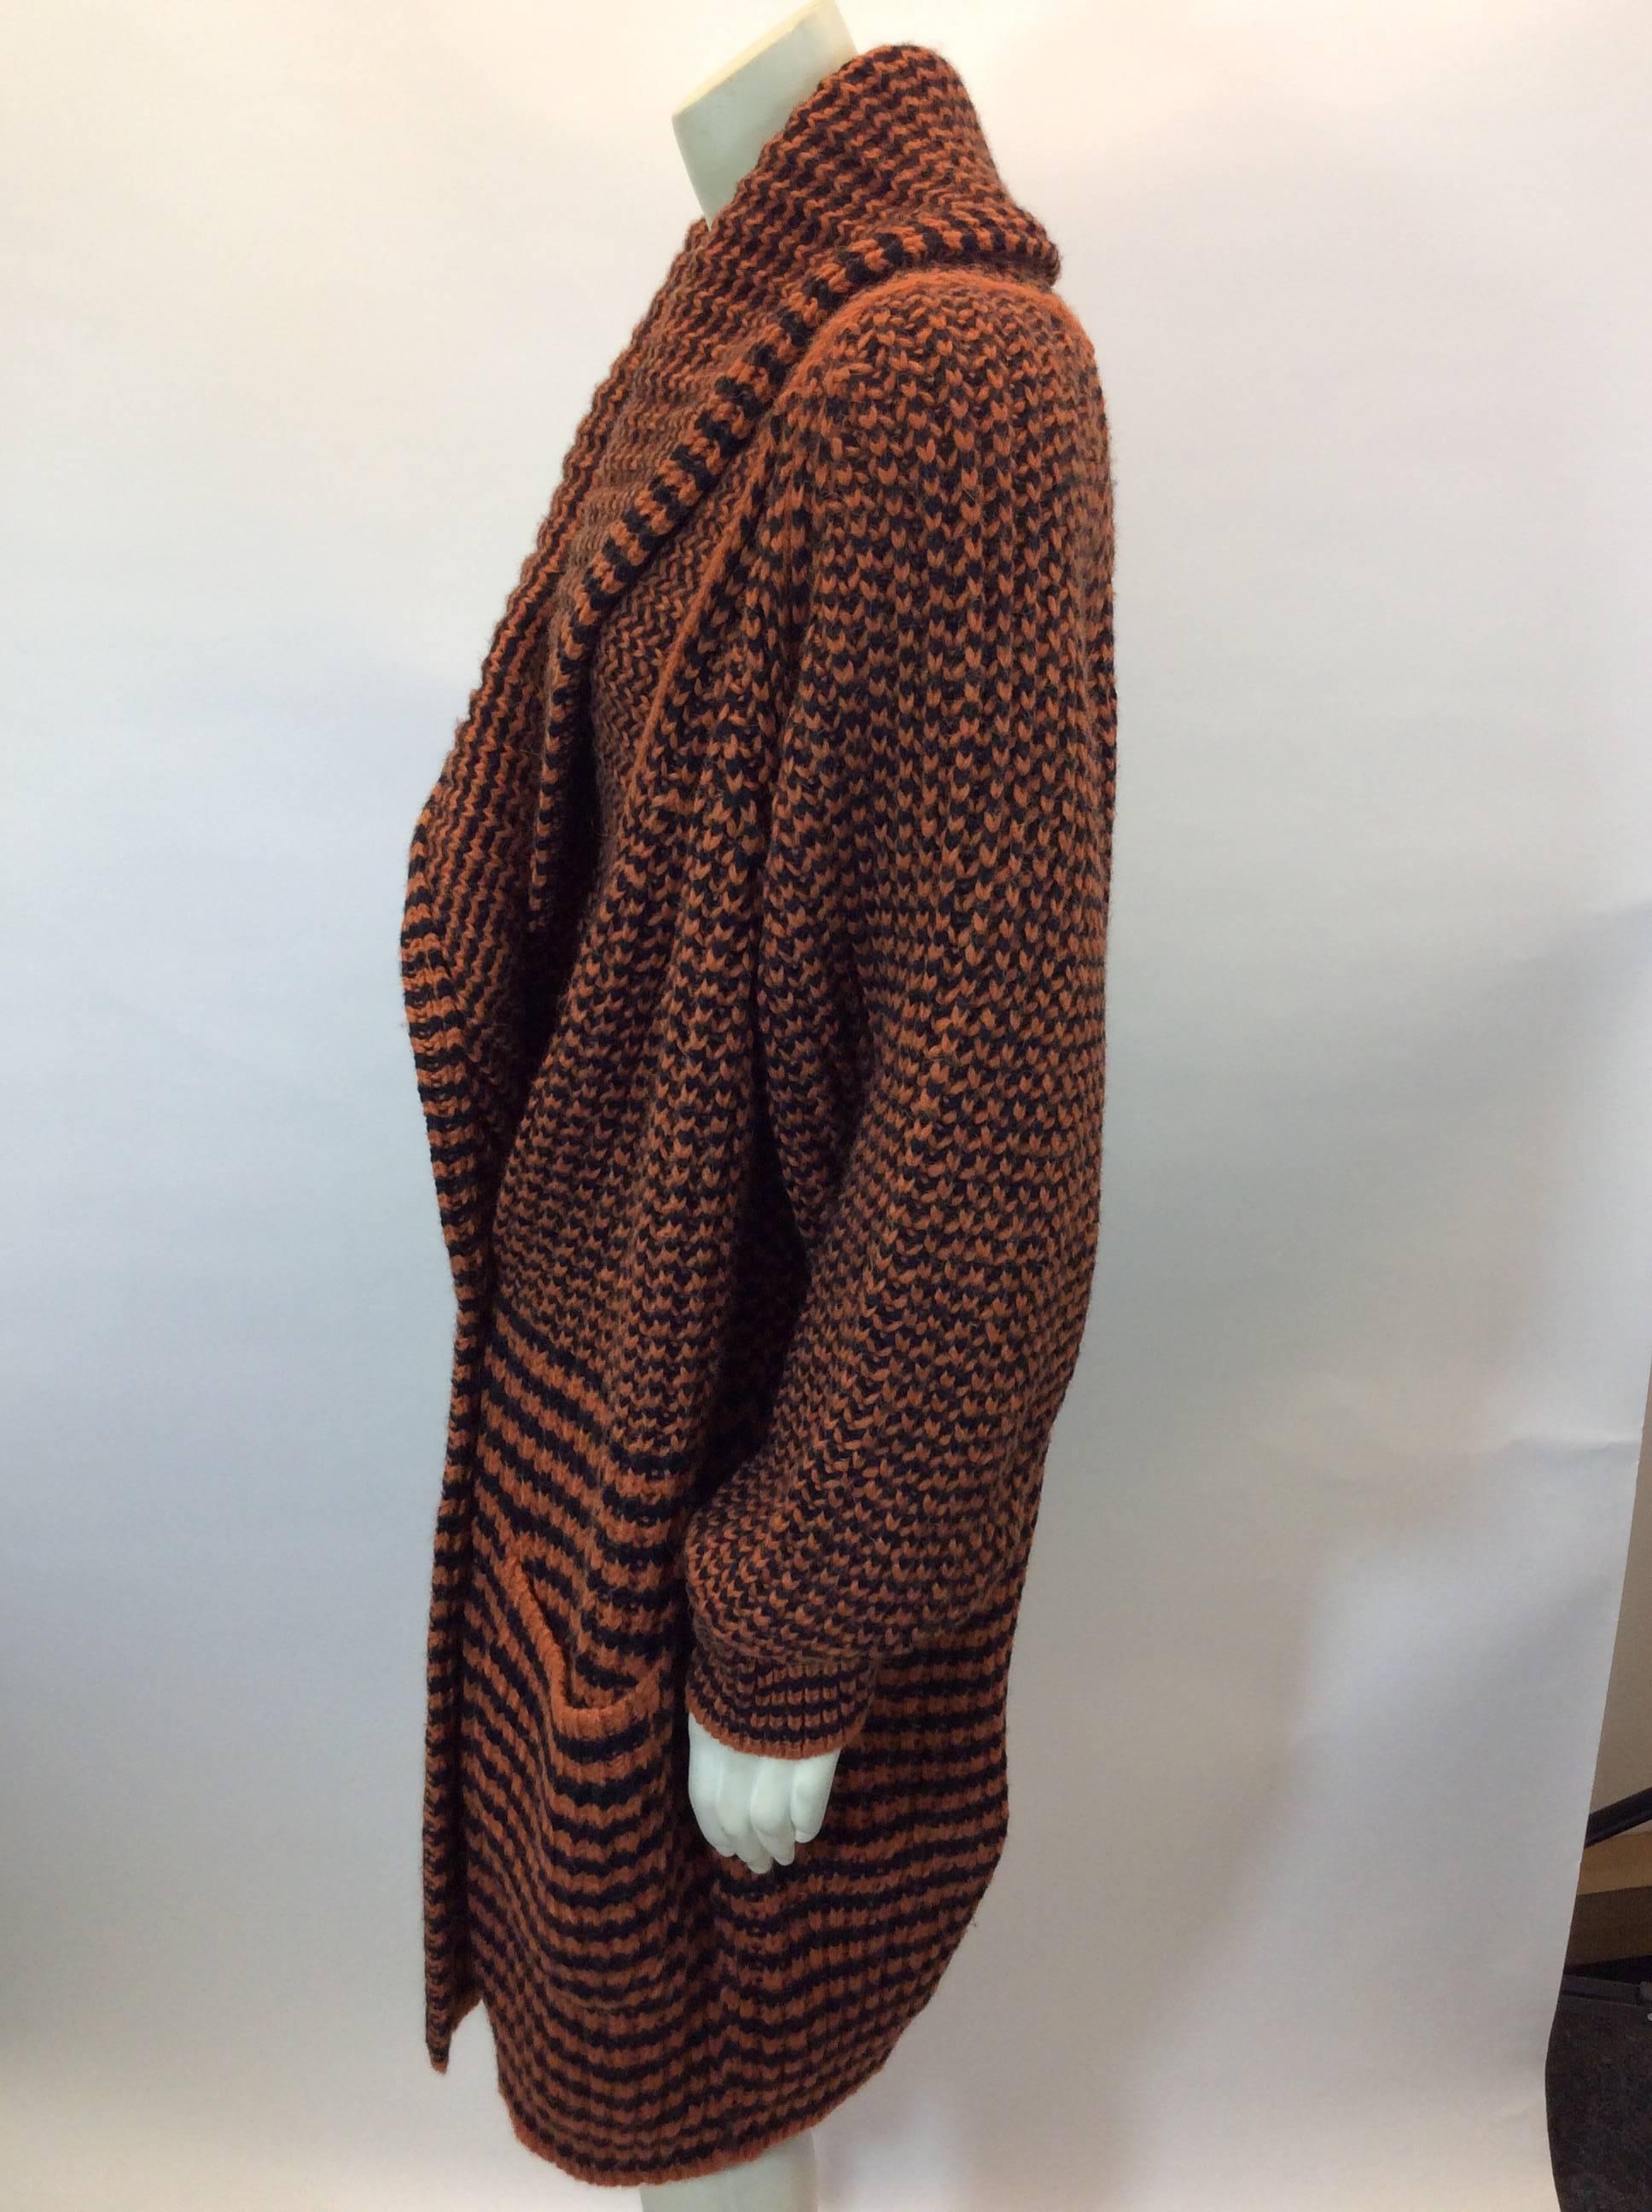 Sonia Rykiel Black and Orange Striped Oversize Cardigan In Excellent Condition For Sale In Narberth, PA